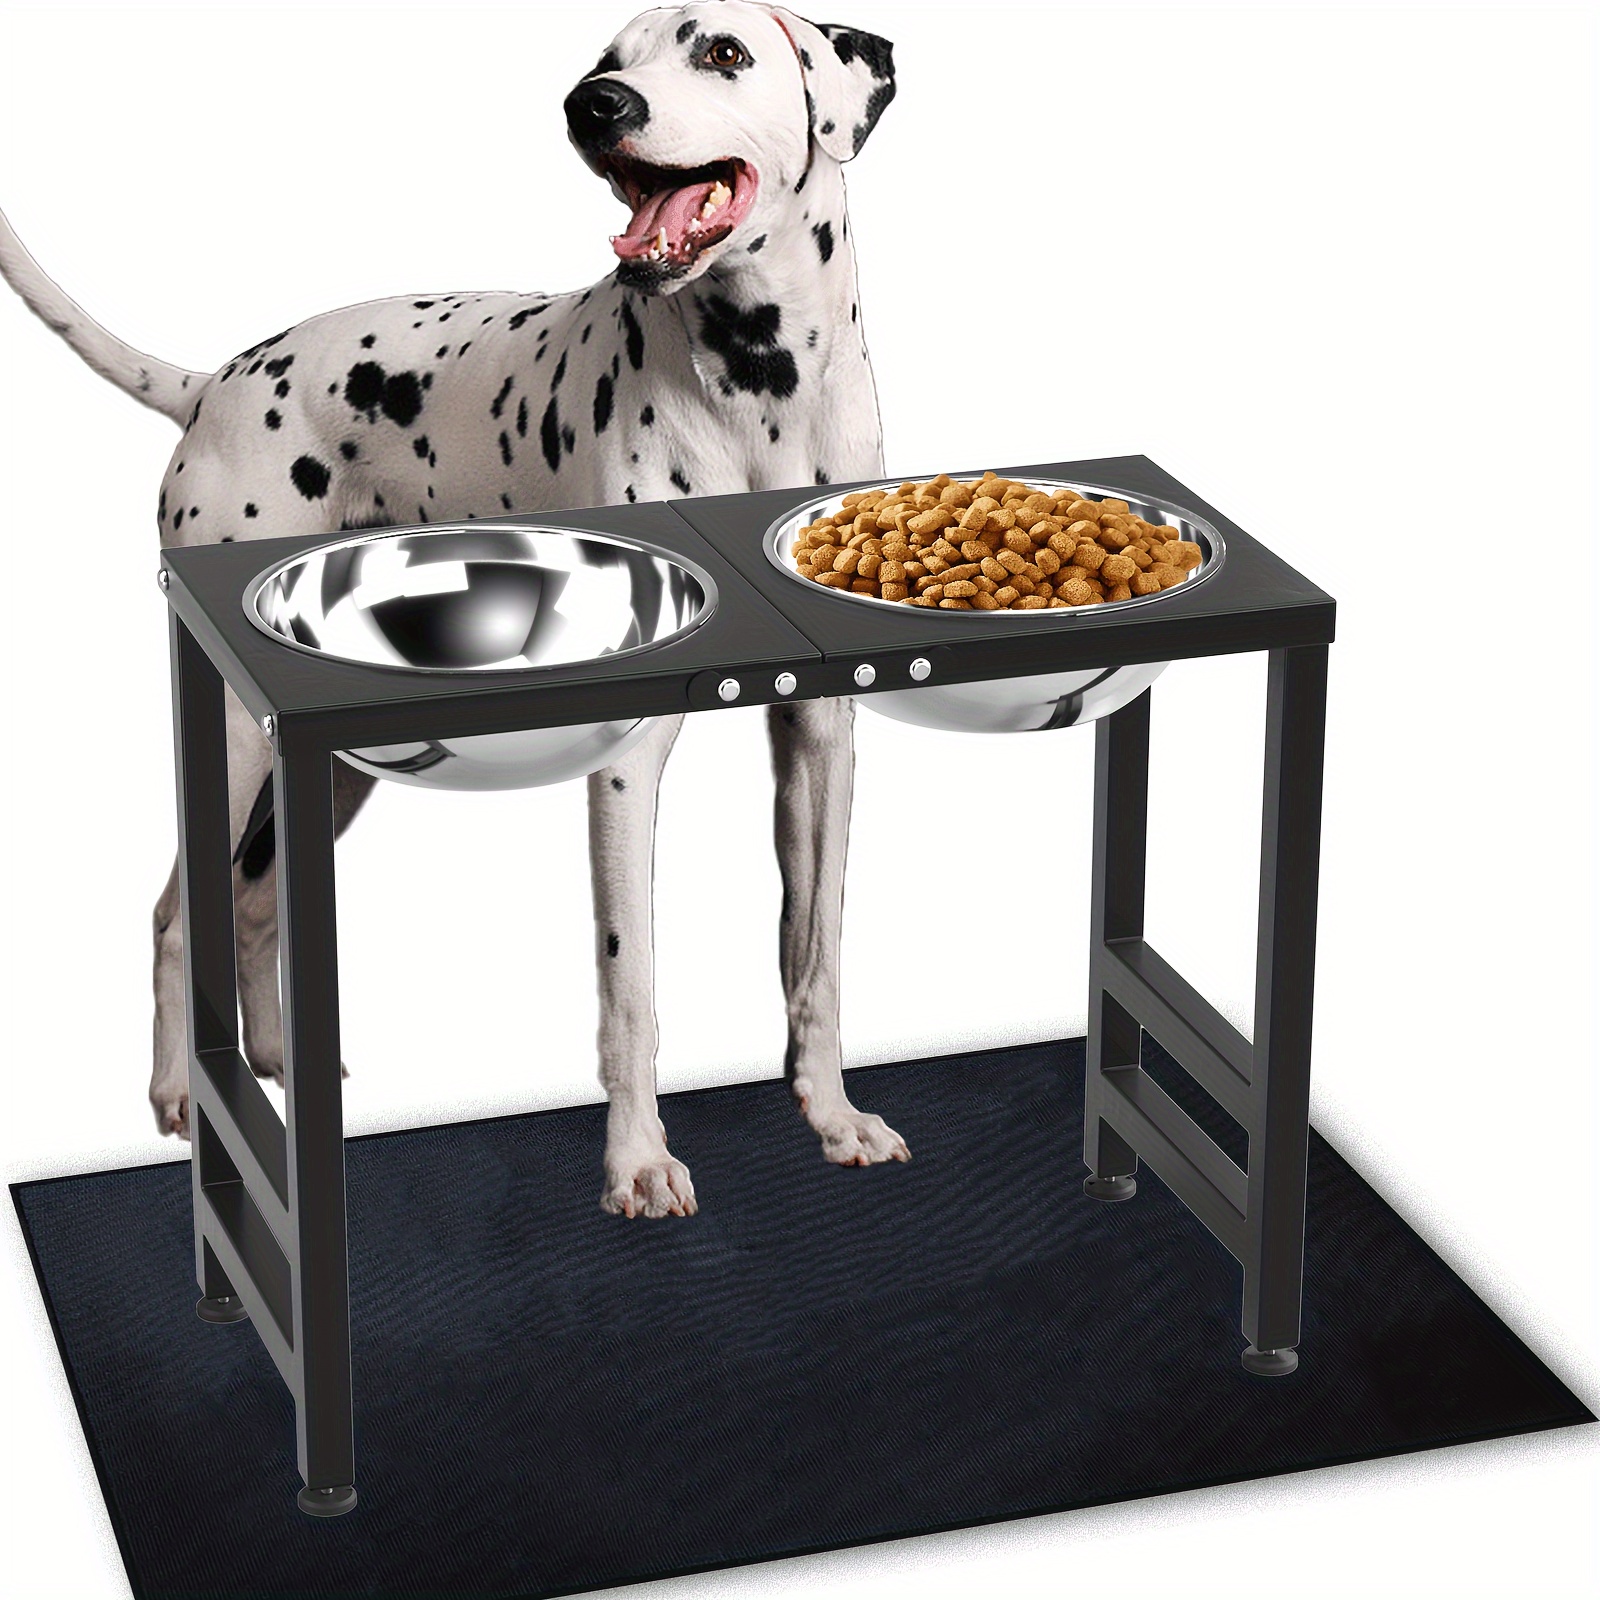 

Metal Elevated Dog Bowls For Extra Large Dogs, Raised Dog Bowl Stand With Food Mat And 3000 Ml Dog Bowls, 17.1 In/43.5 Cm Tall Dog Food Water Feeder For Extra Large Breed